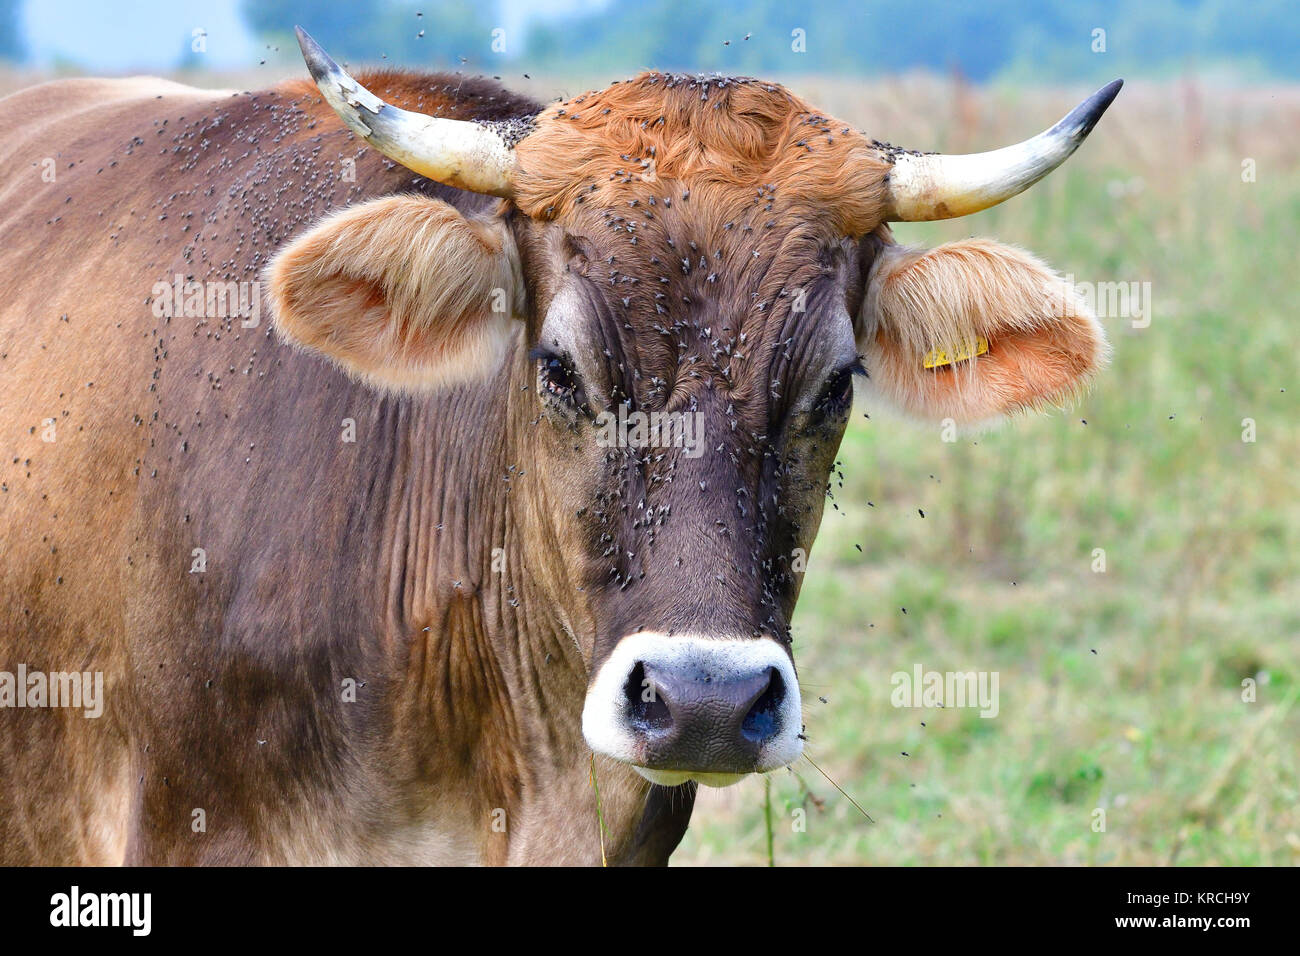 brown cattle with fly pest Stock Photo